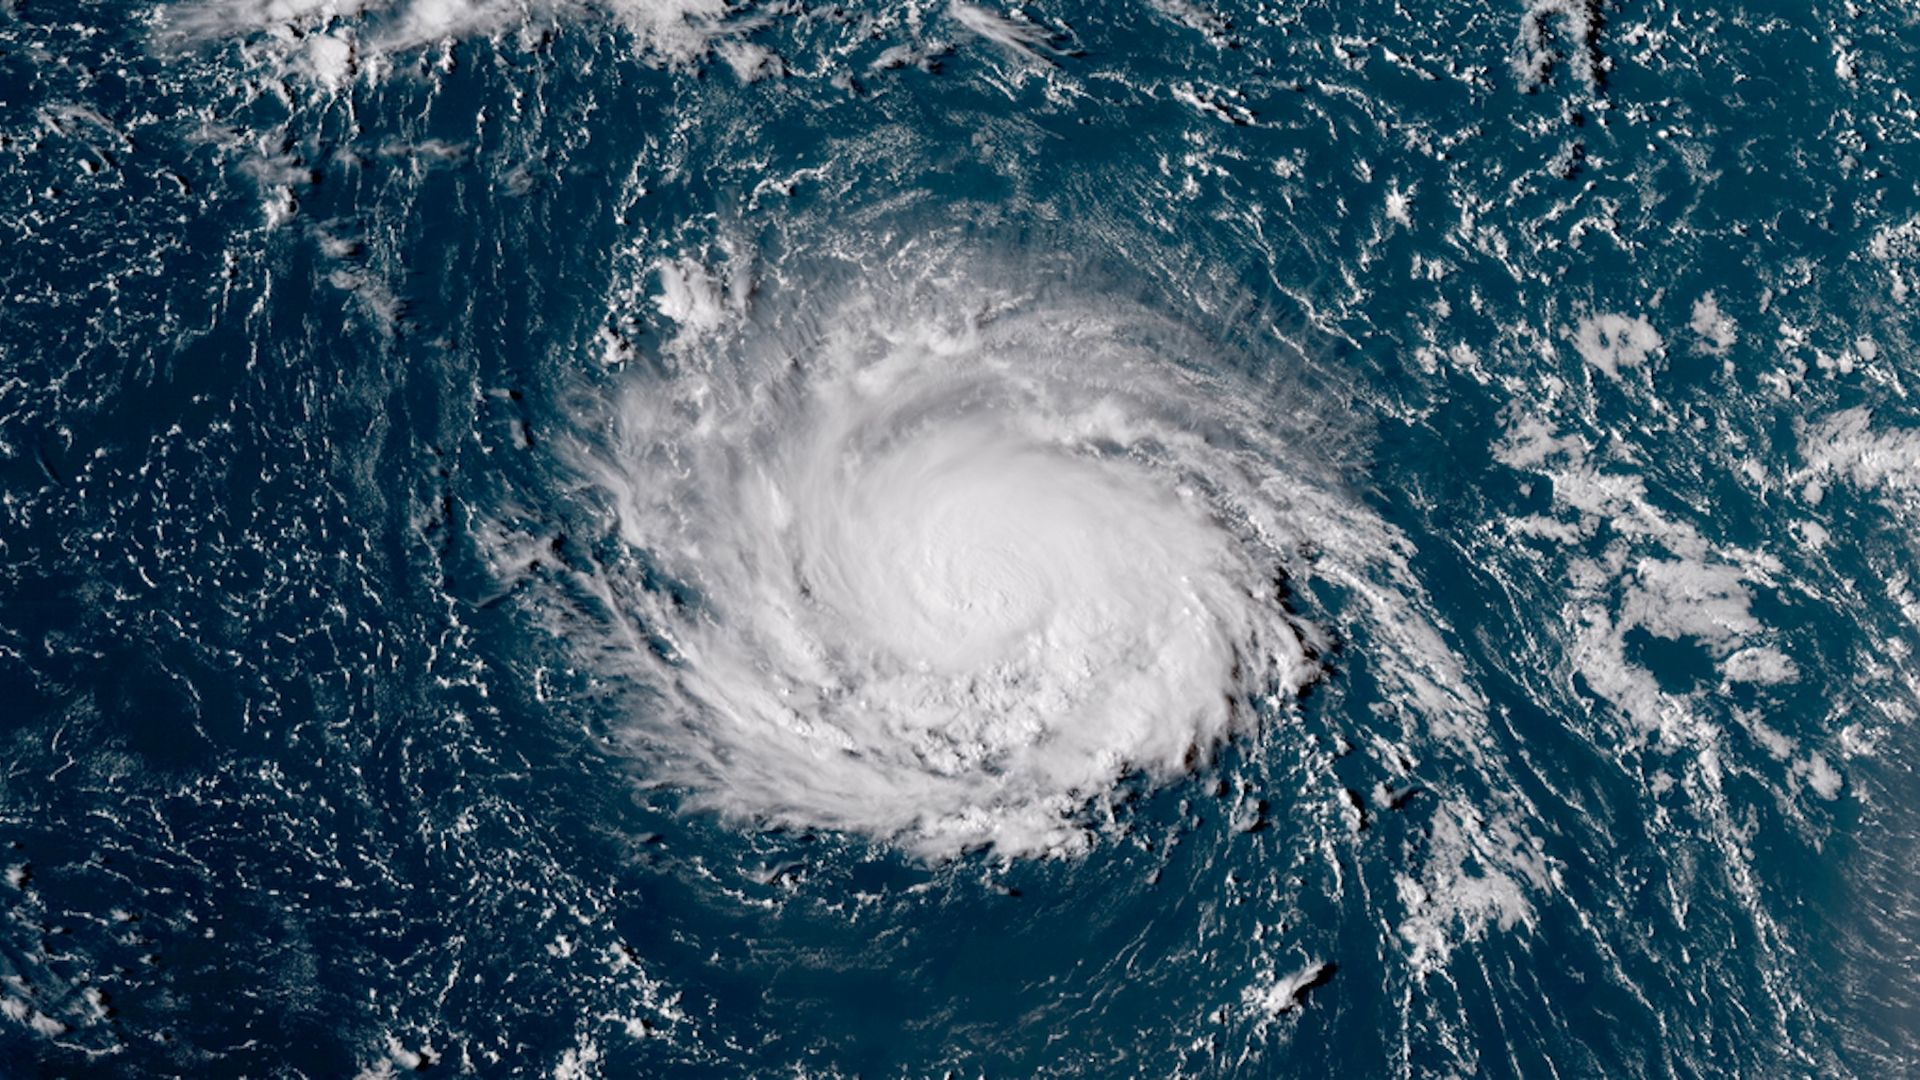 Satellite image of Hurricane Florence as a Category 1 storm.